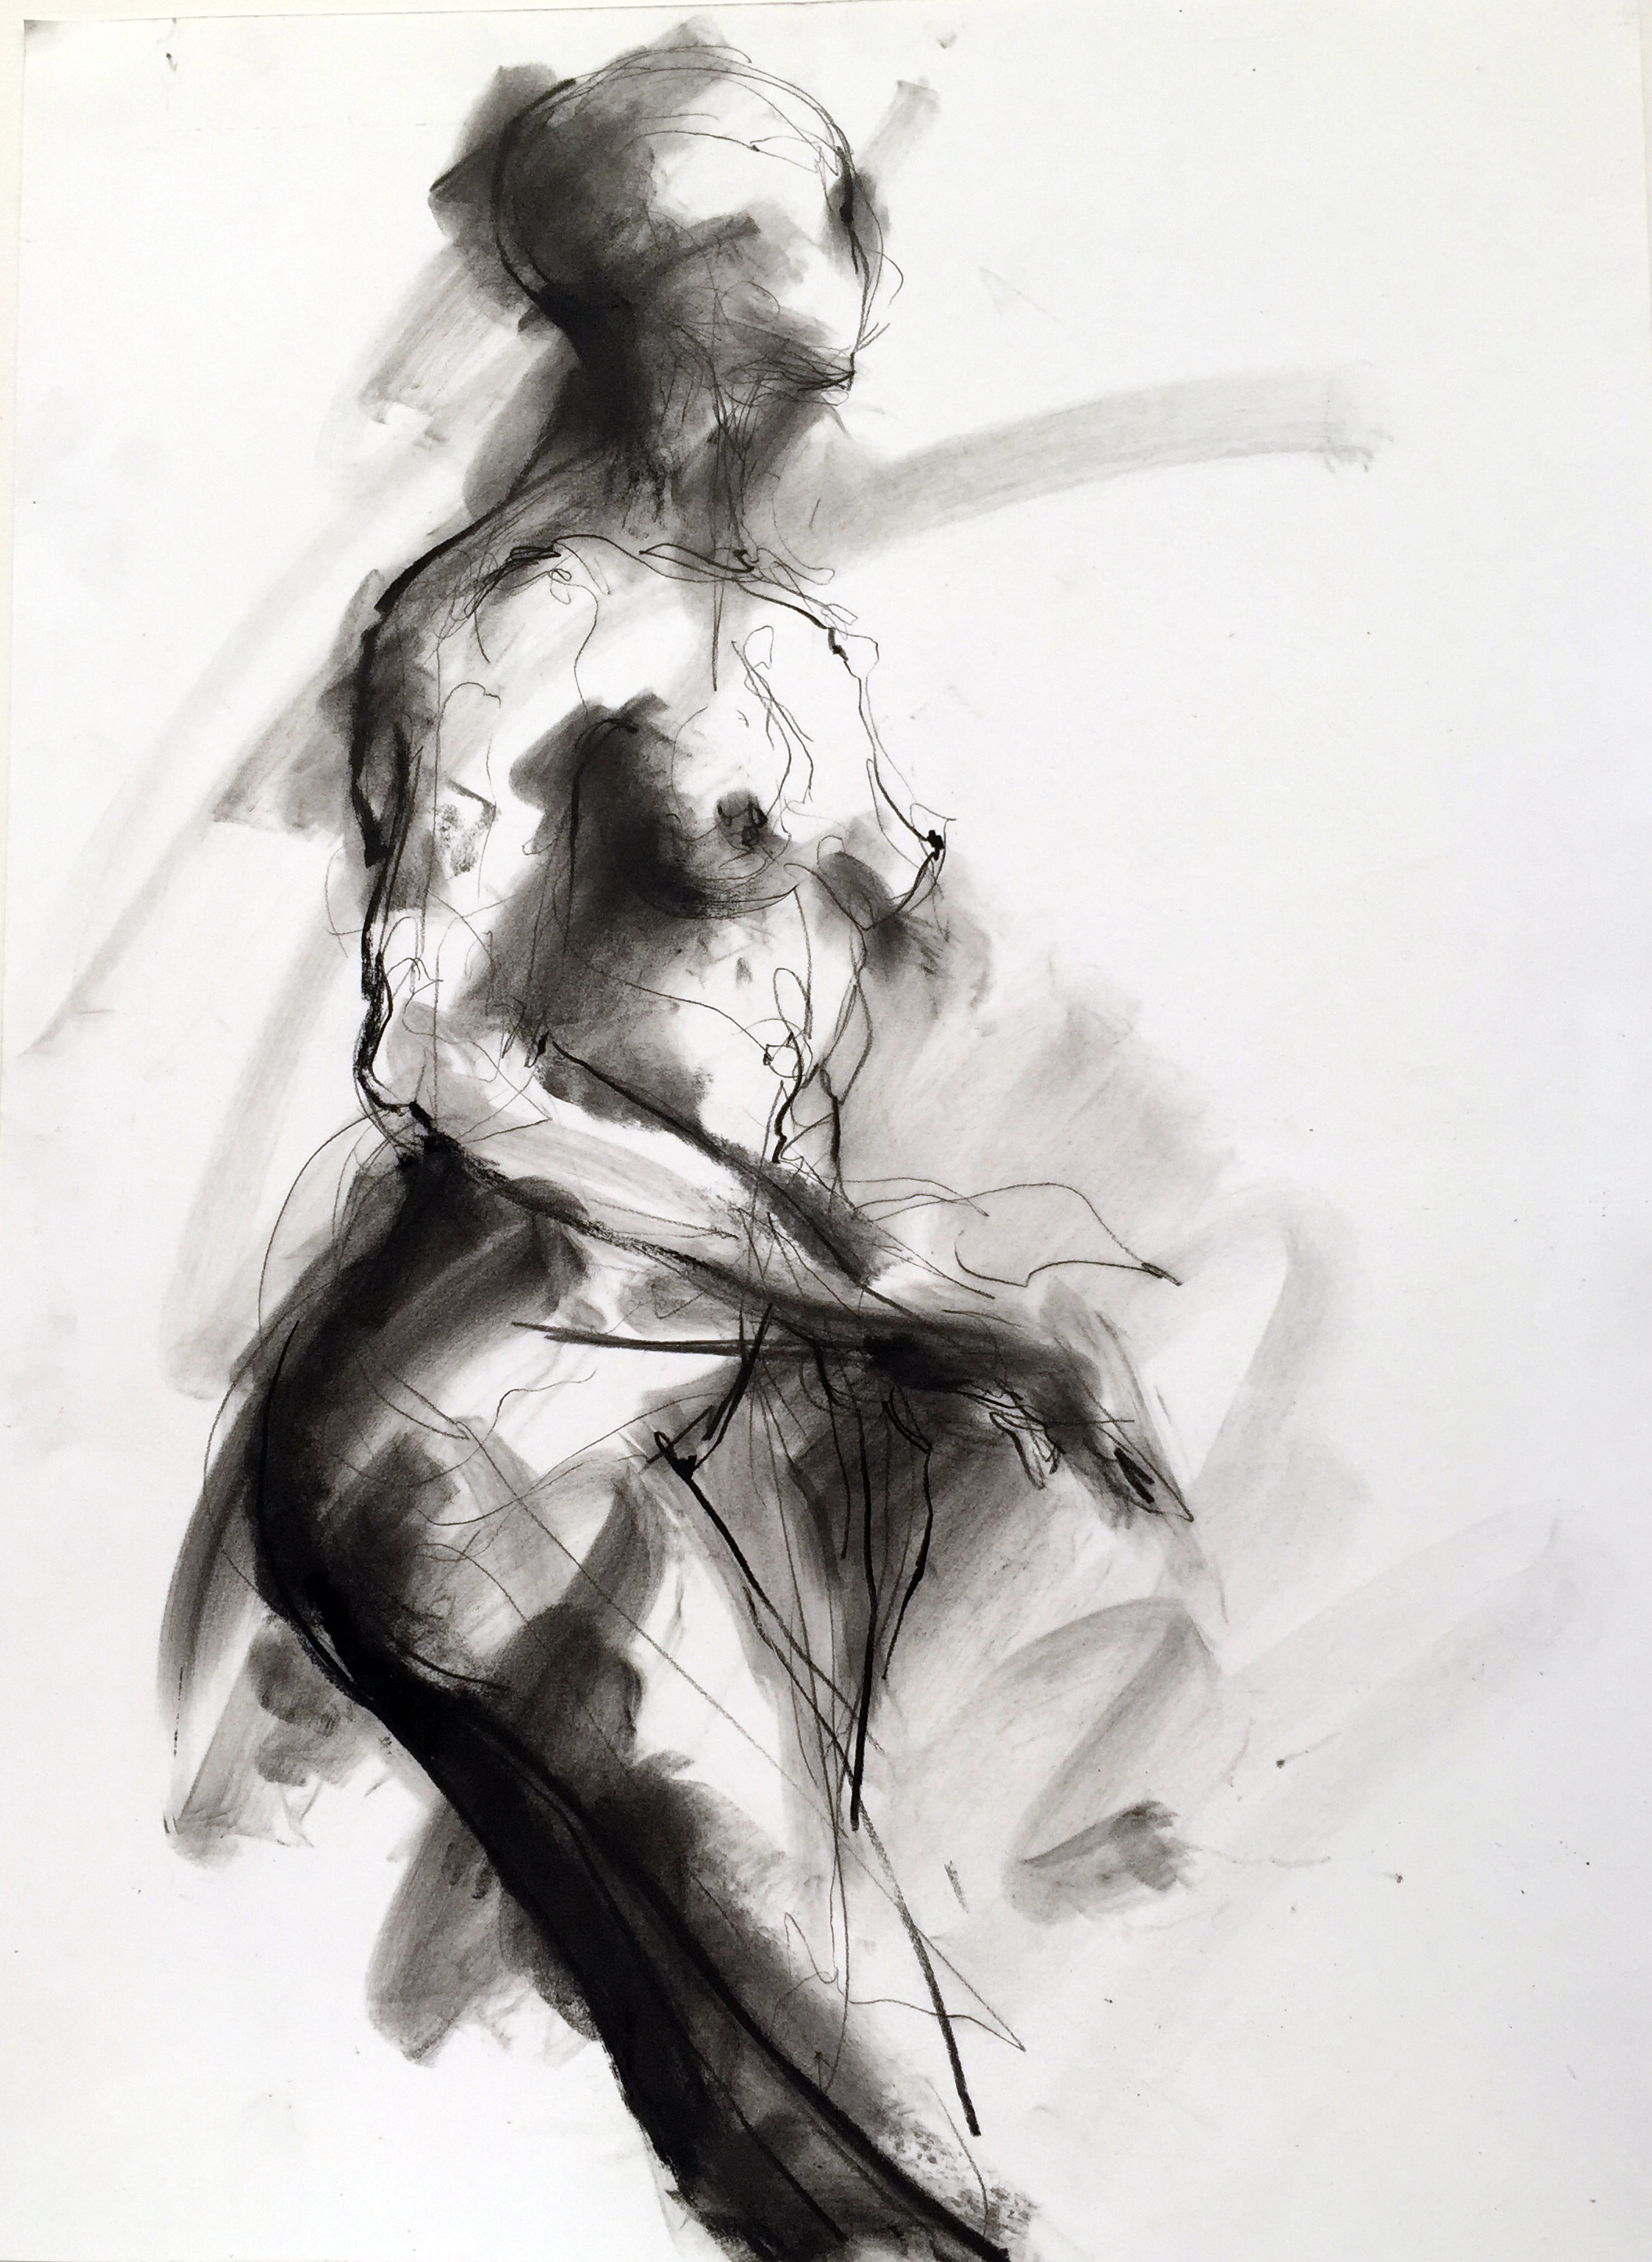   Nude 25  2016 Charcoal on paper 18" x 12" 